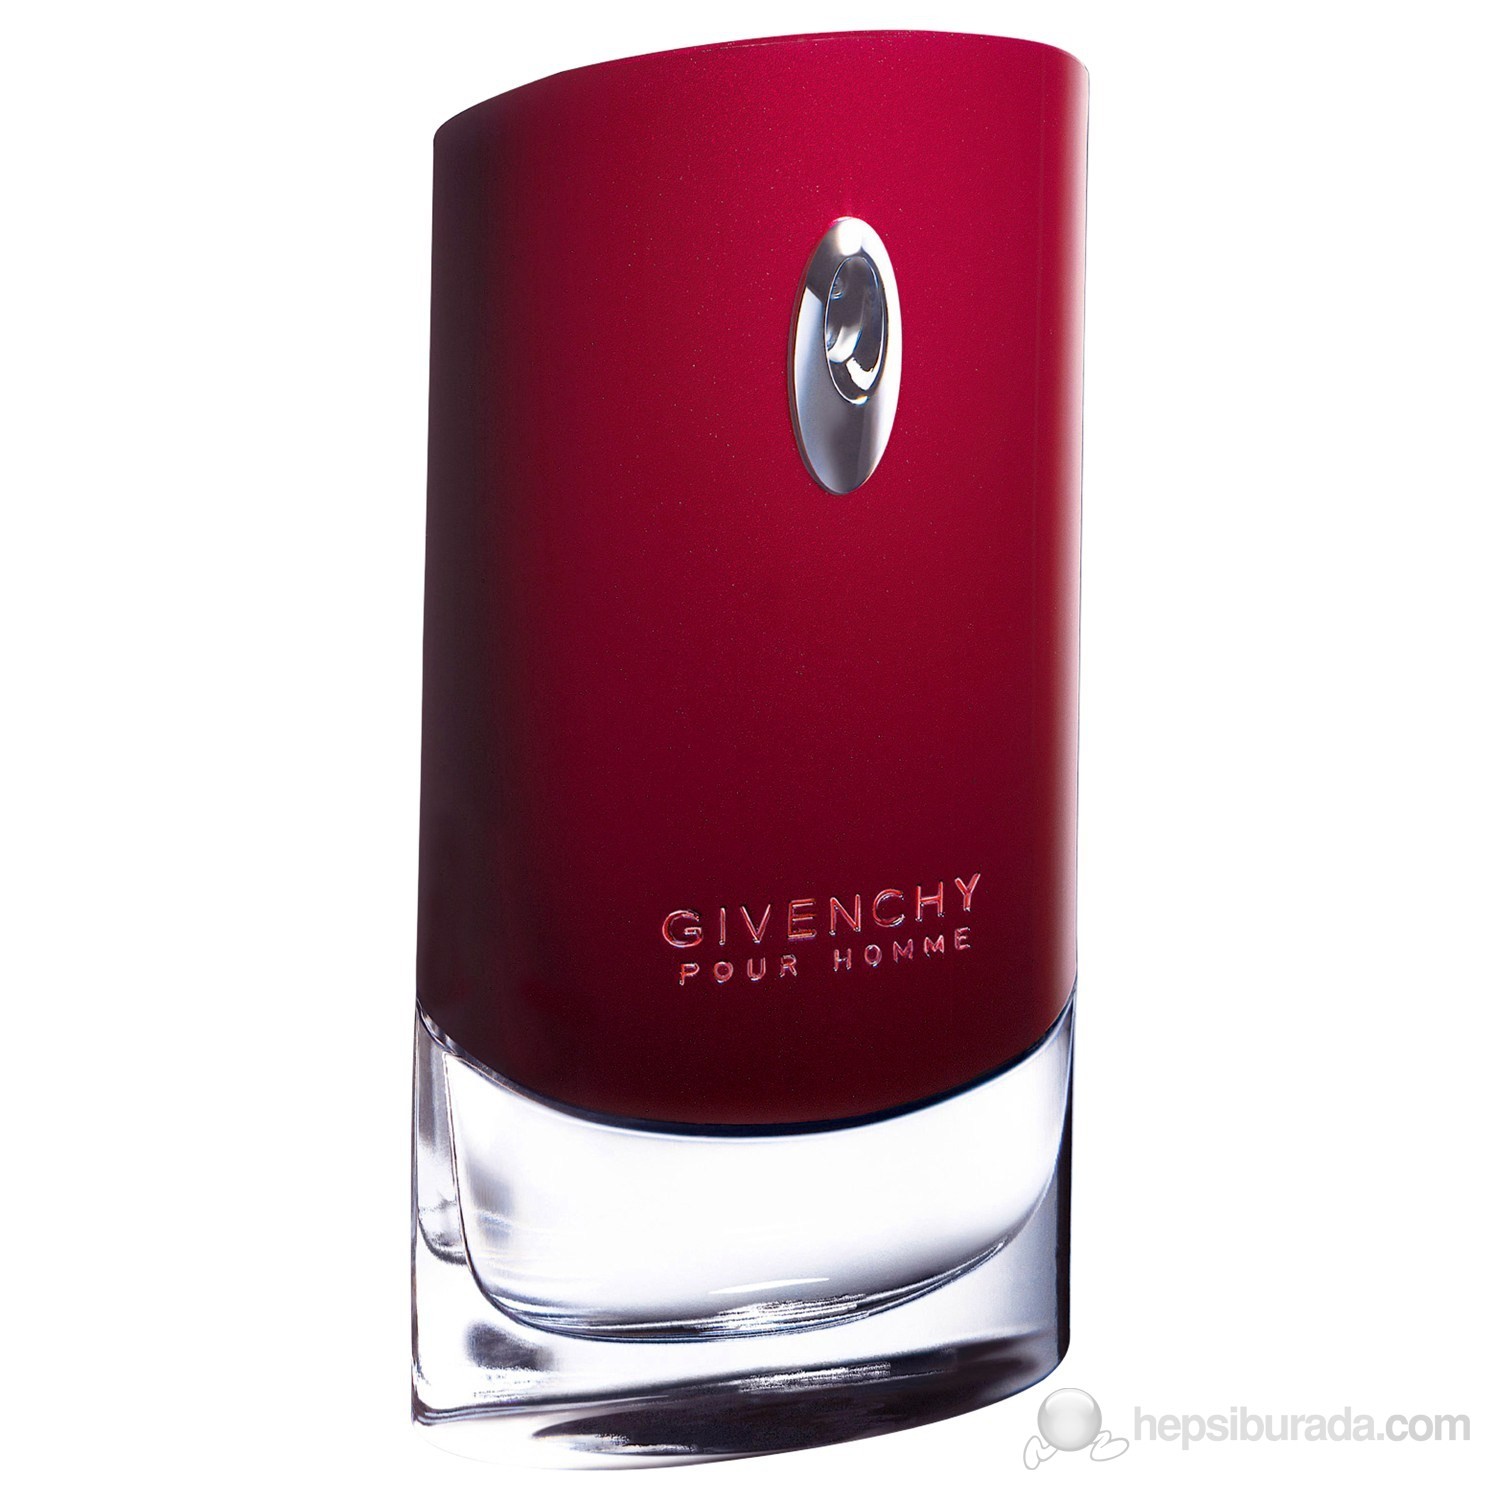 Pour homme для мужчин. Givenchy "pour homme" EDT, 100ml. Givenchy pour homme Givenchy. Givenchy Givenchy pour homme, 100 ml. Givenchy pour homme Red.